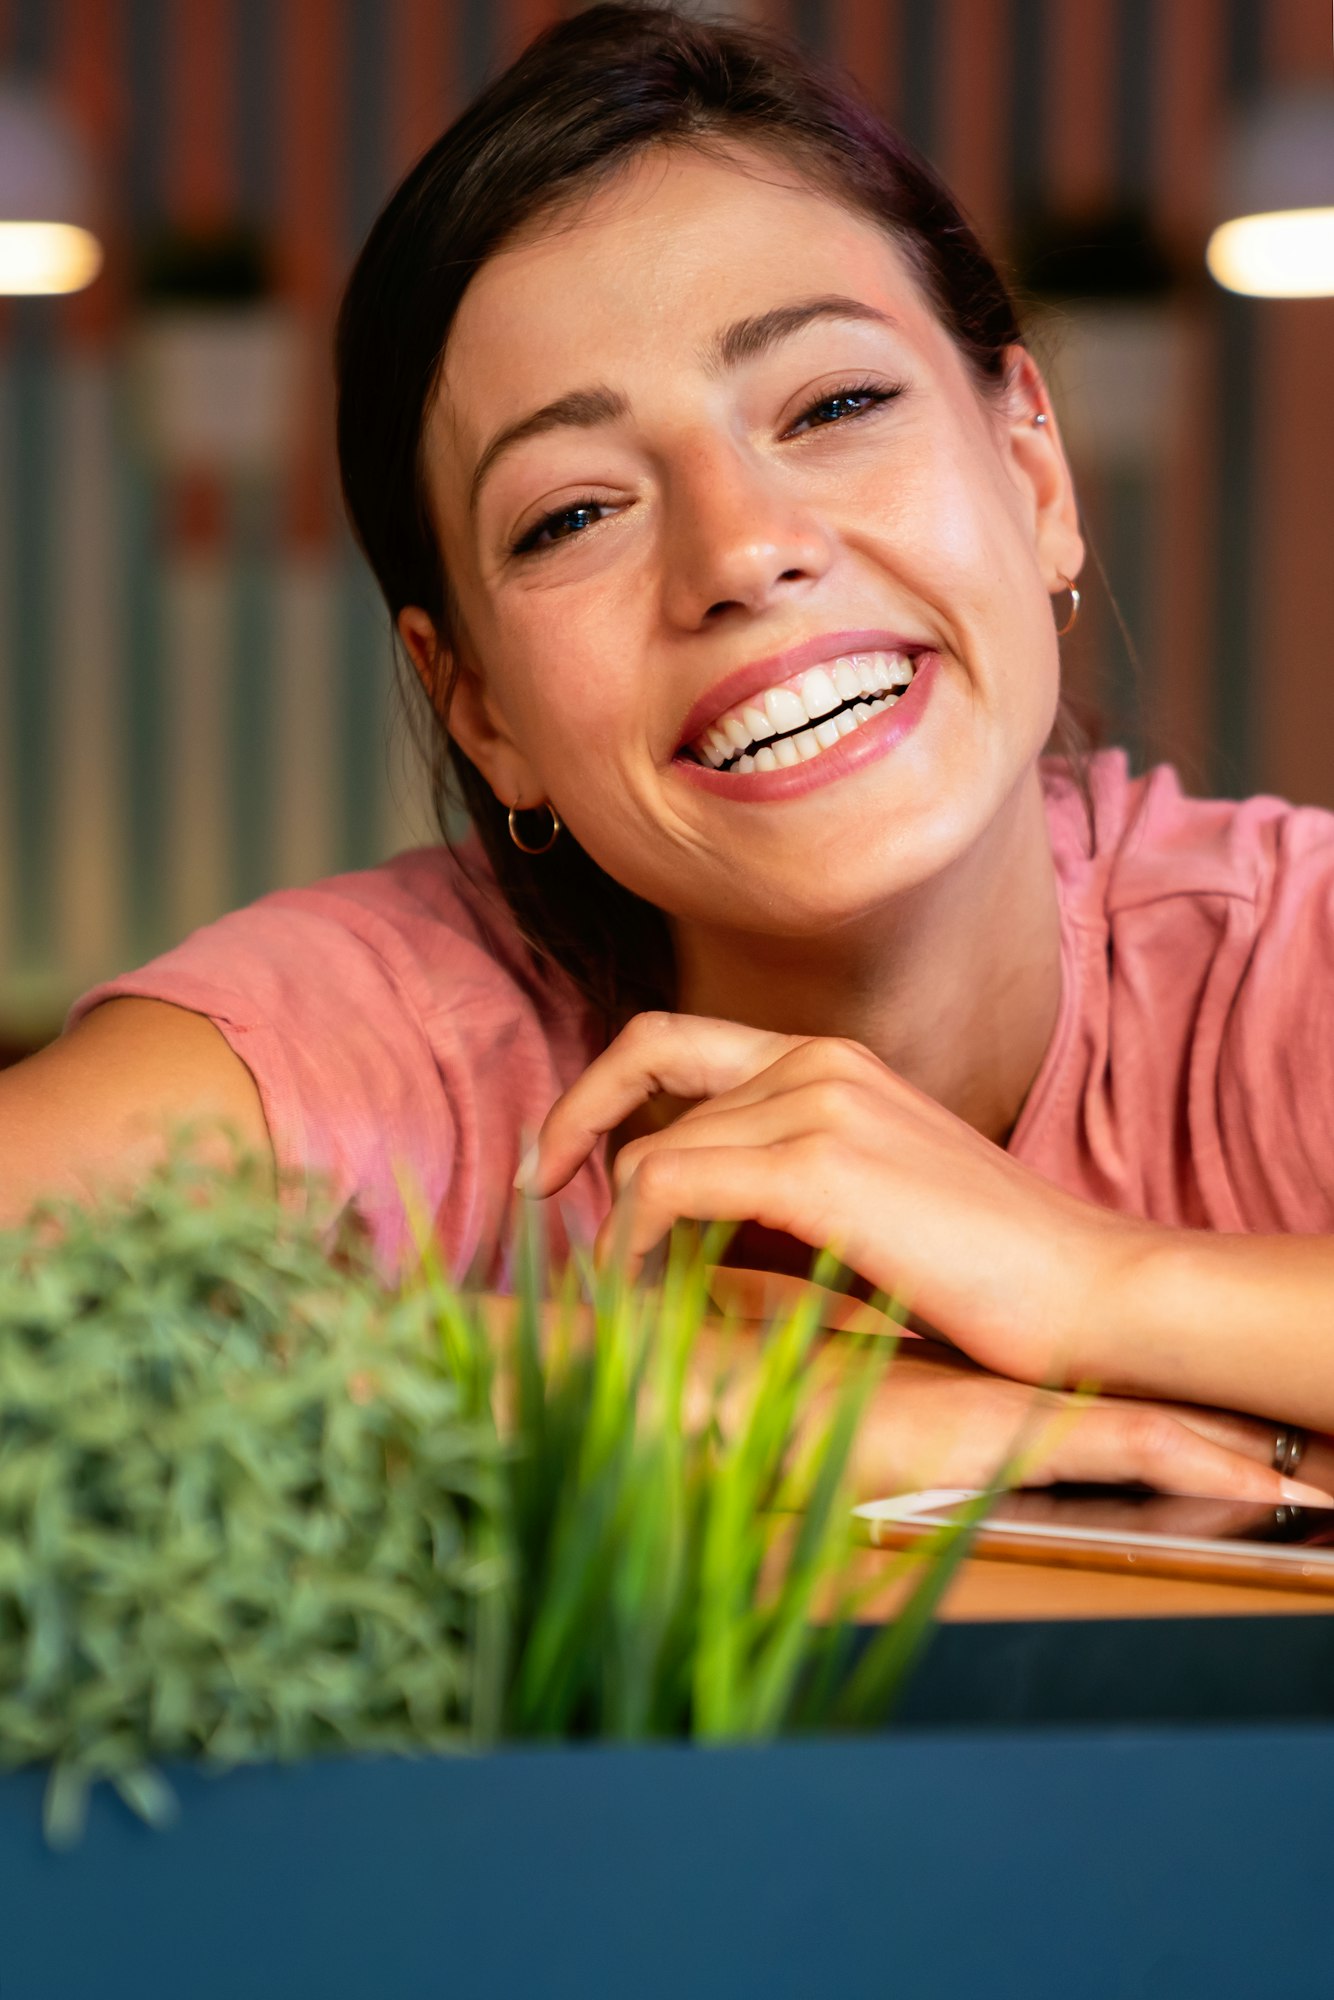 A woman with orthodontic treatments smiling